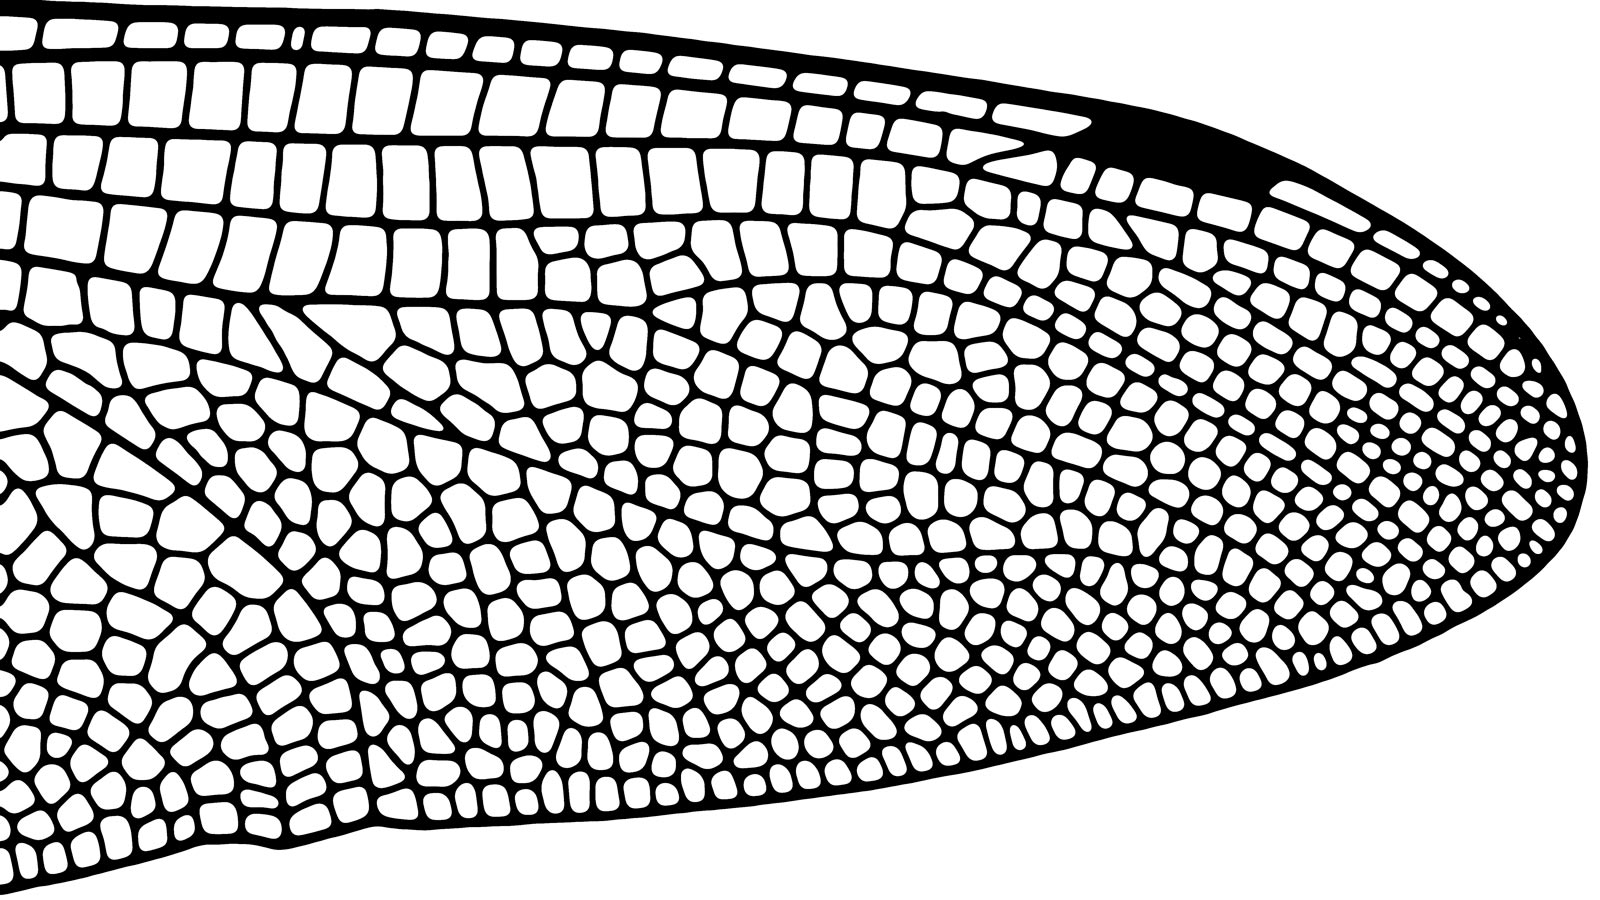 insect-wing-structure.jpg